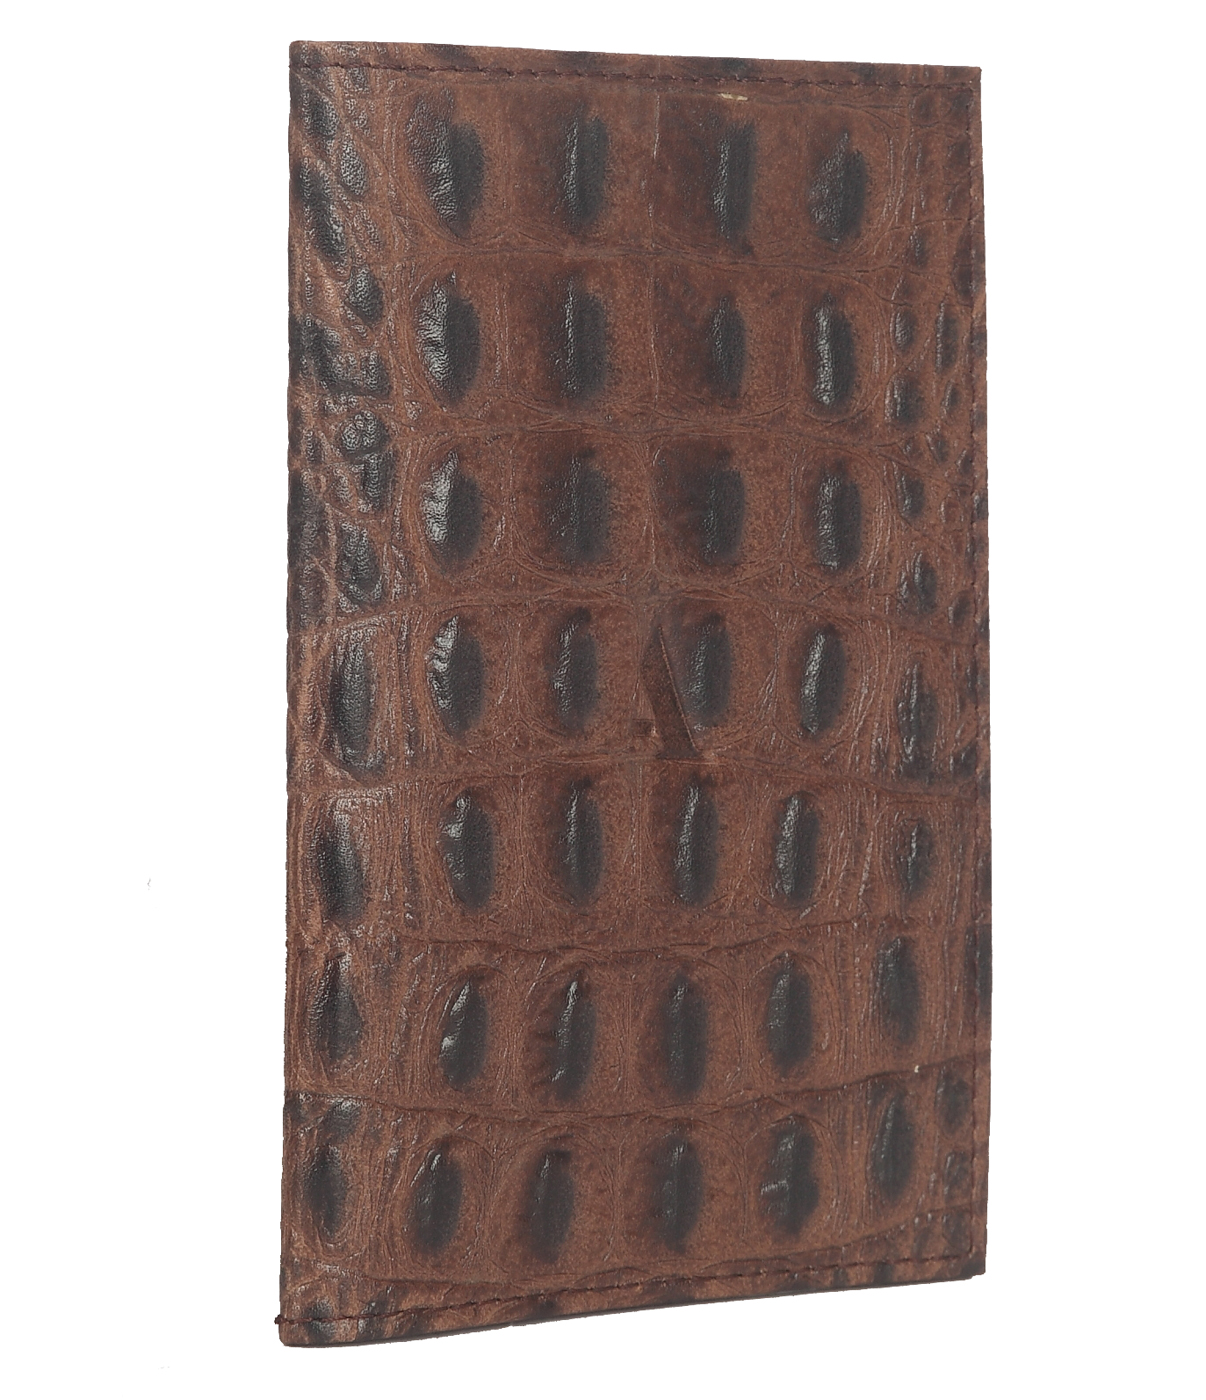 W251--Passport cover in Genuine Leather - Brown.